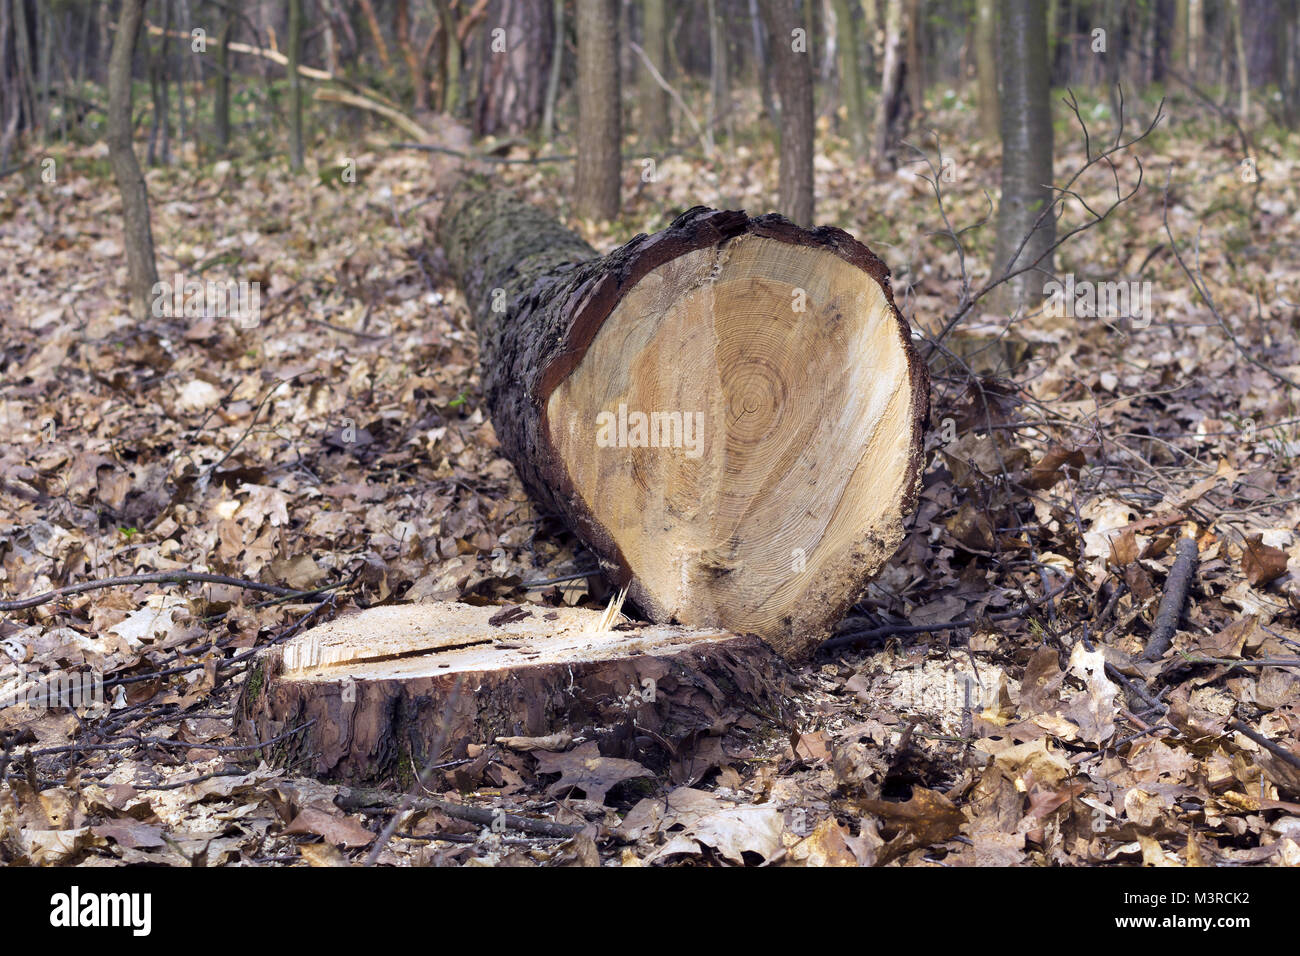 felled tree trunk and stump in the woods Stock Photo